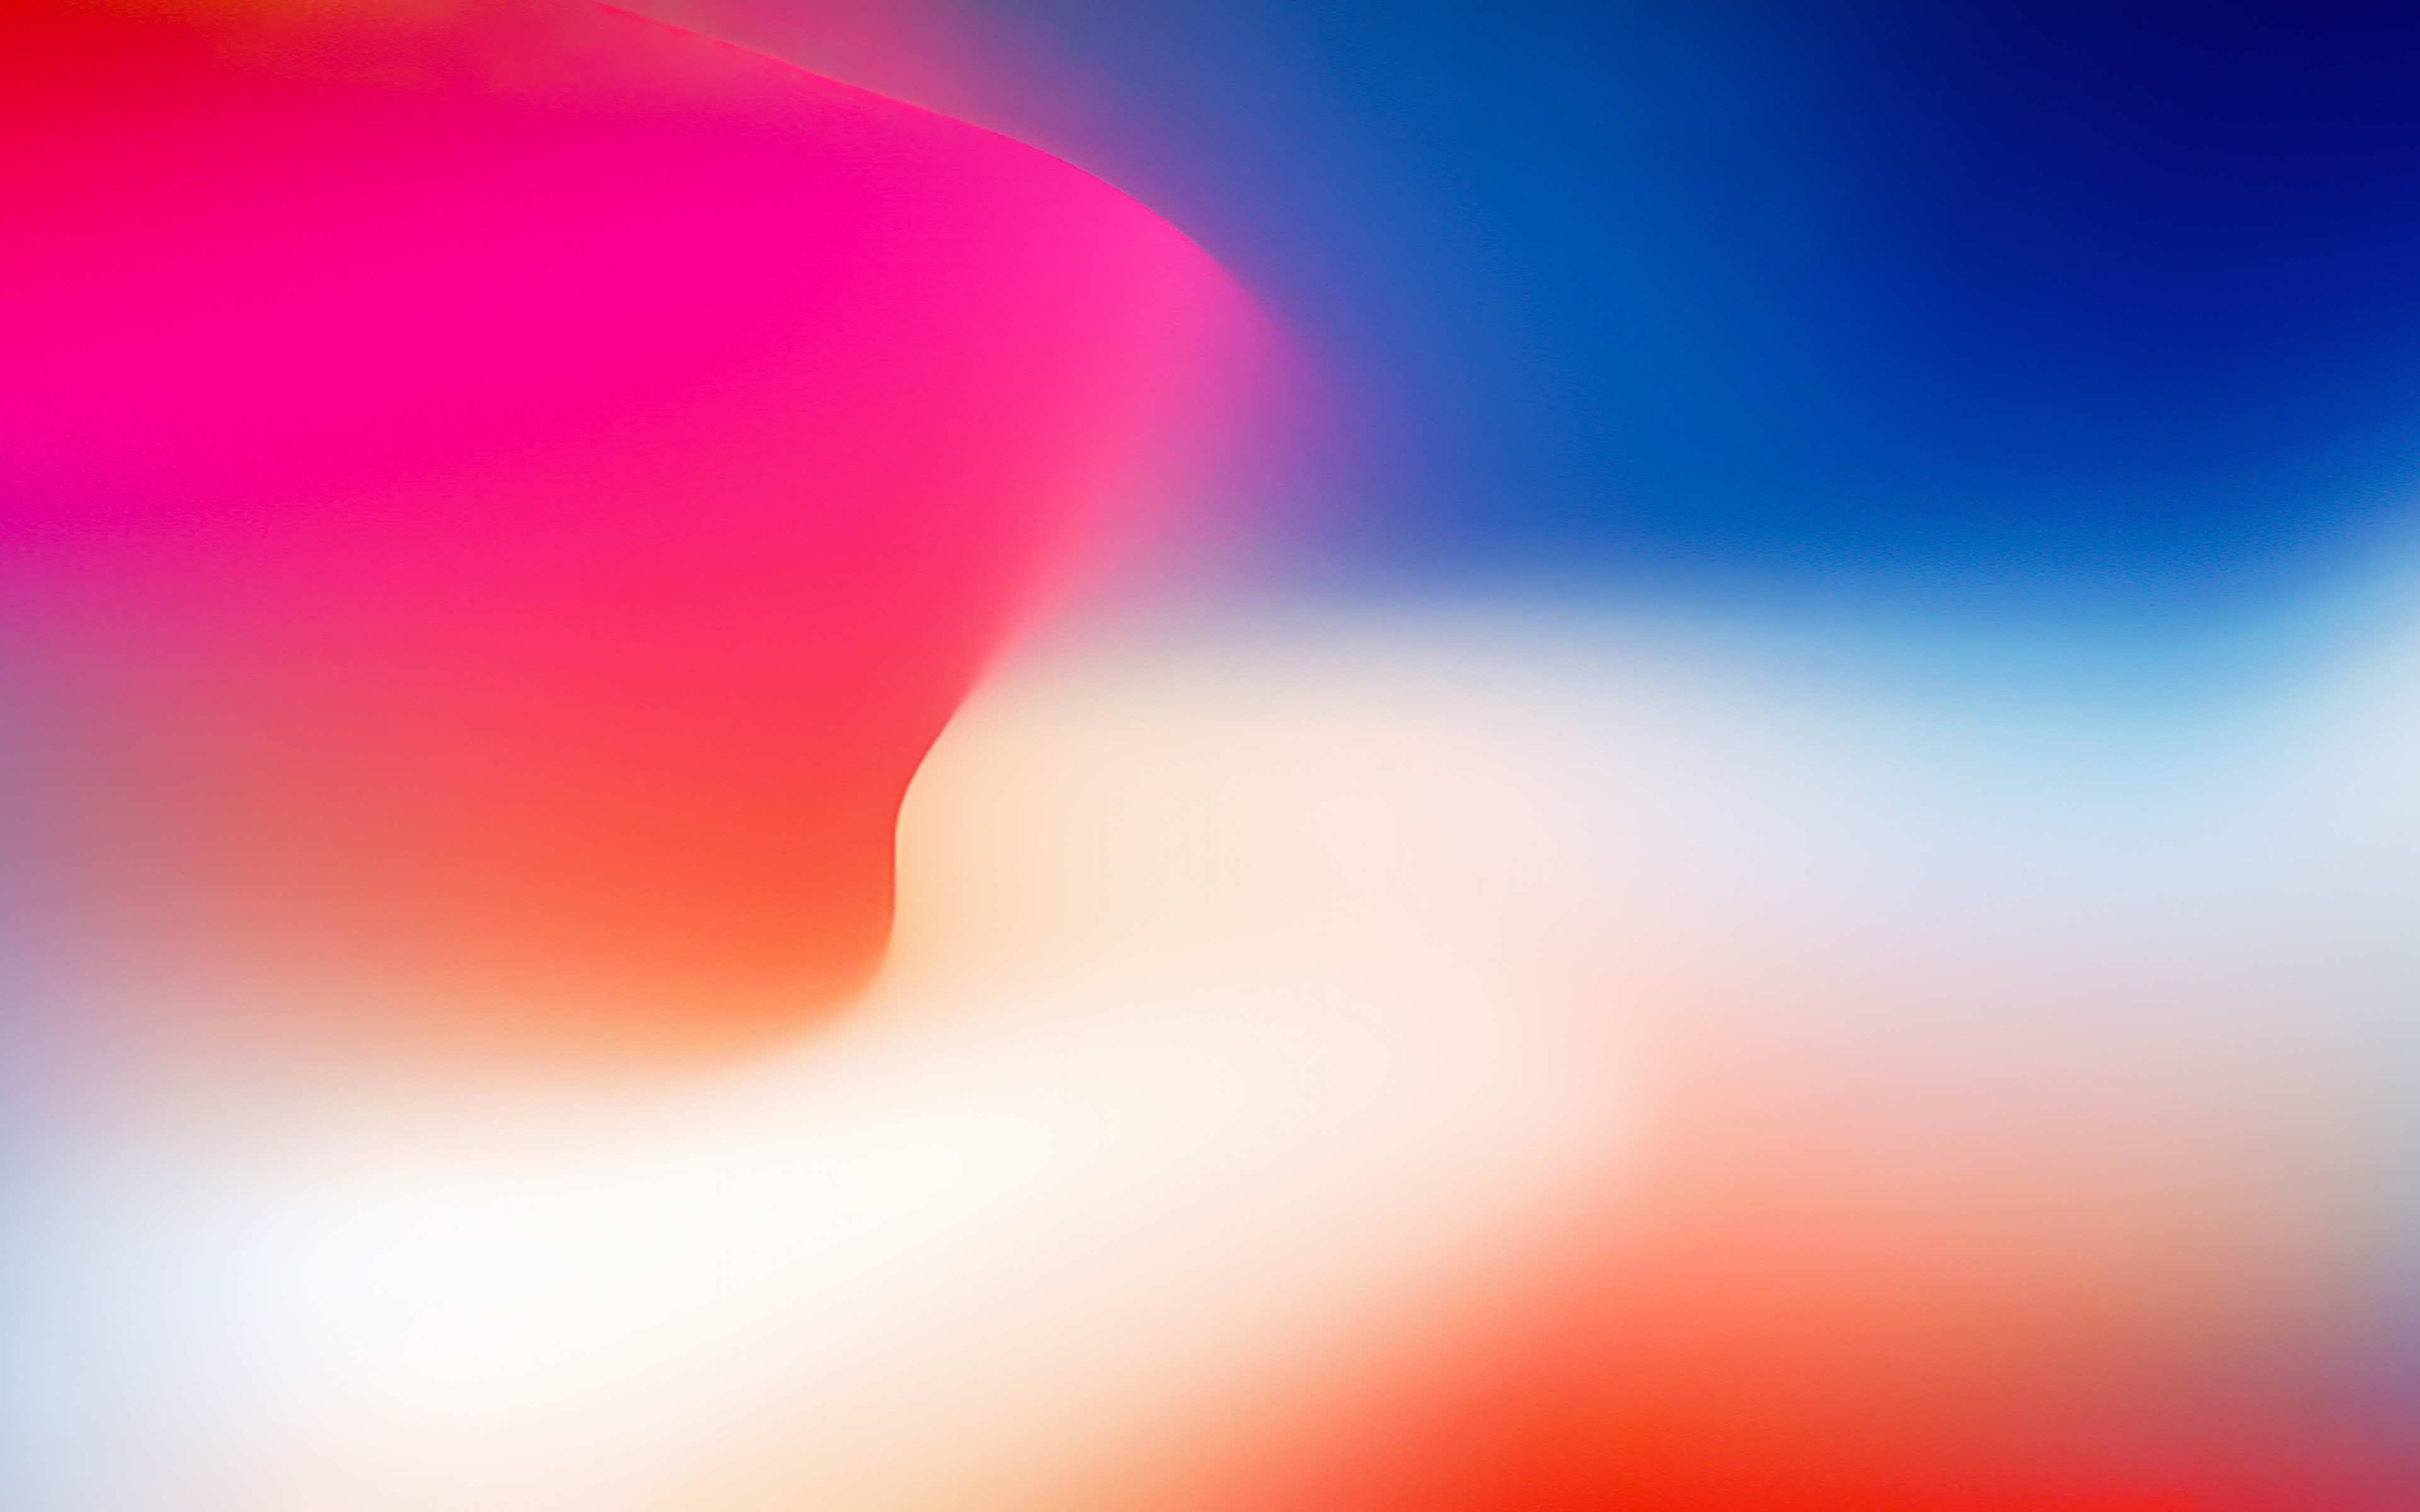 Iphone X, Stock, Colorful Gradient, Abstract, Wallpaper - Ios 11 Wallpaper 4k Iphone - HD Wallpaper 